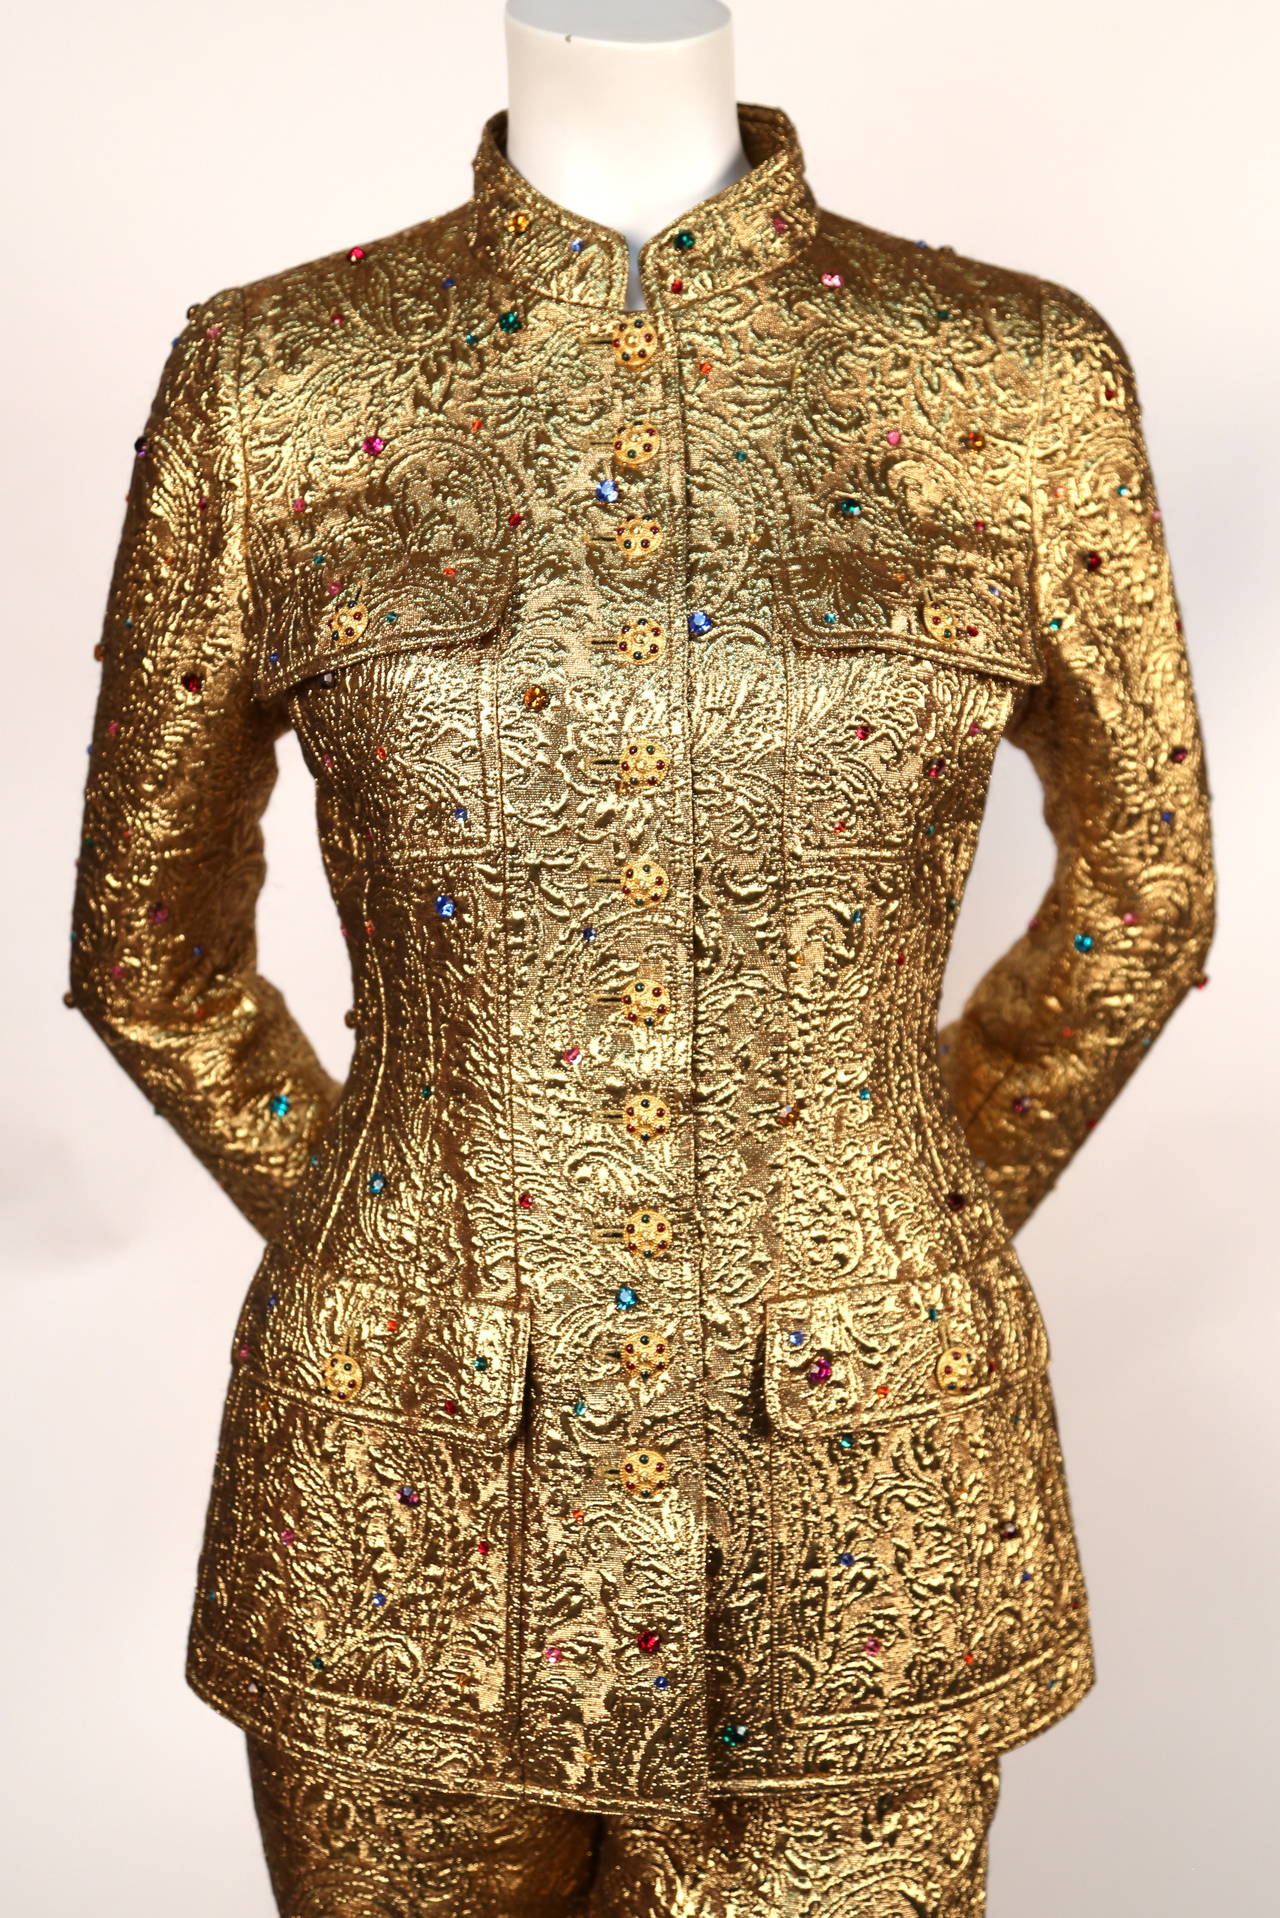 Very rare gold metallic matelasse quilted suit with colored rhinestones and poured glass Gripoix buttons from Chanel exactly as seen on the runway and featured in the Chanel ad campaign for fall of 1996. Labeled a French size 36. Approximate